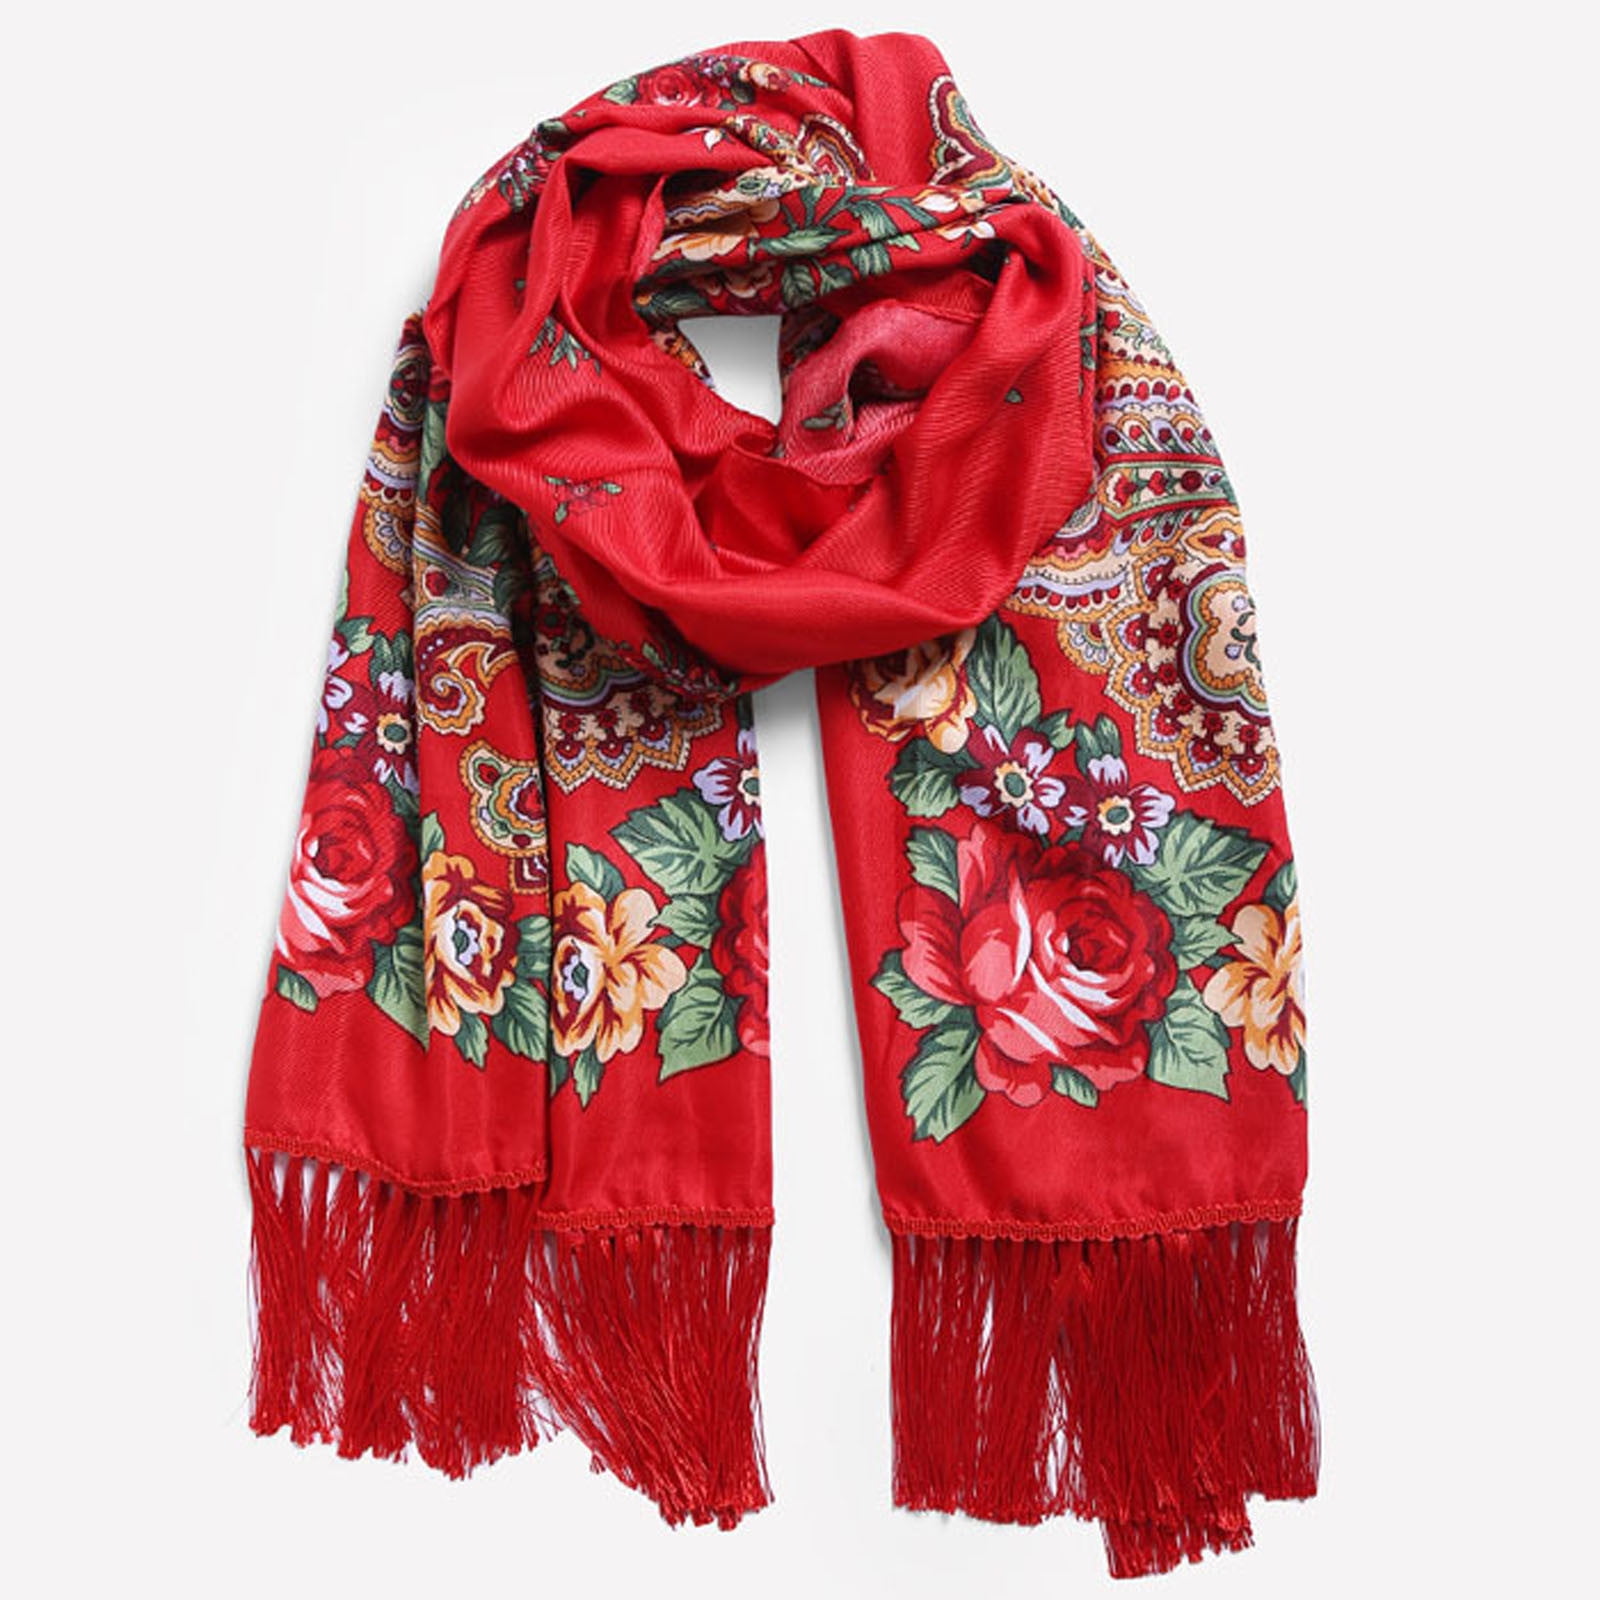 Red Scarfs Scarfs for Men Cotton Scarf Russian Babushka Women's Scarf Shawl  Wrap Traditional Retro Ukraine Style Printed Tassels Long Scarfs on Sale  Gifts for Man 